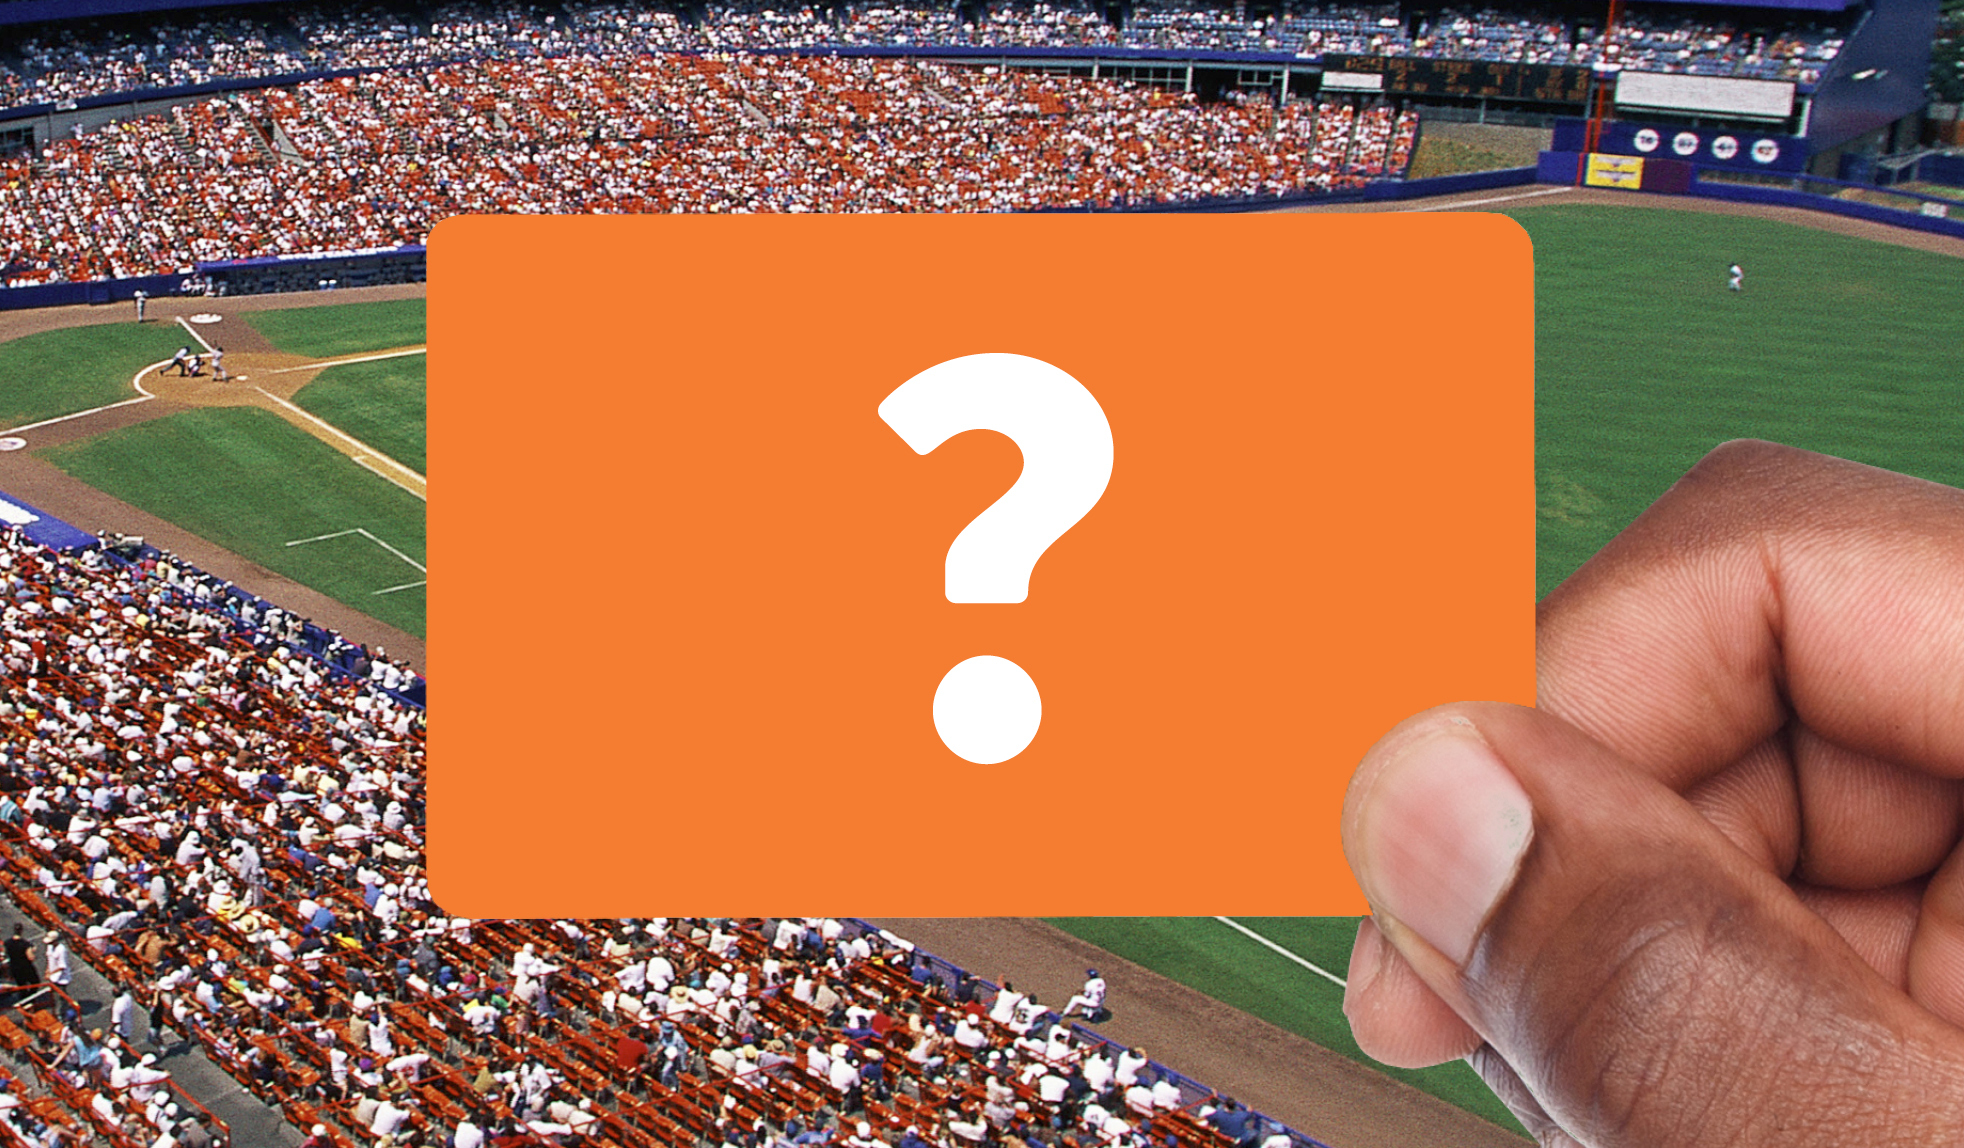 We're teaming up with the New York Mets to bring you this amazin' special edition library card!